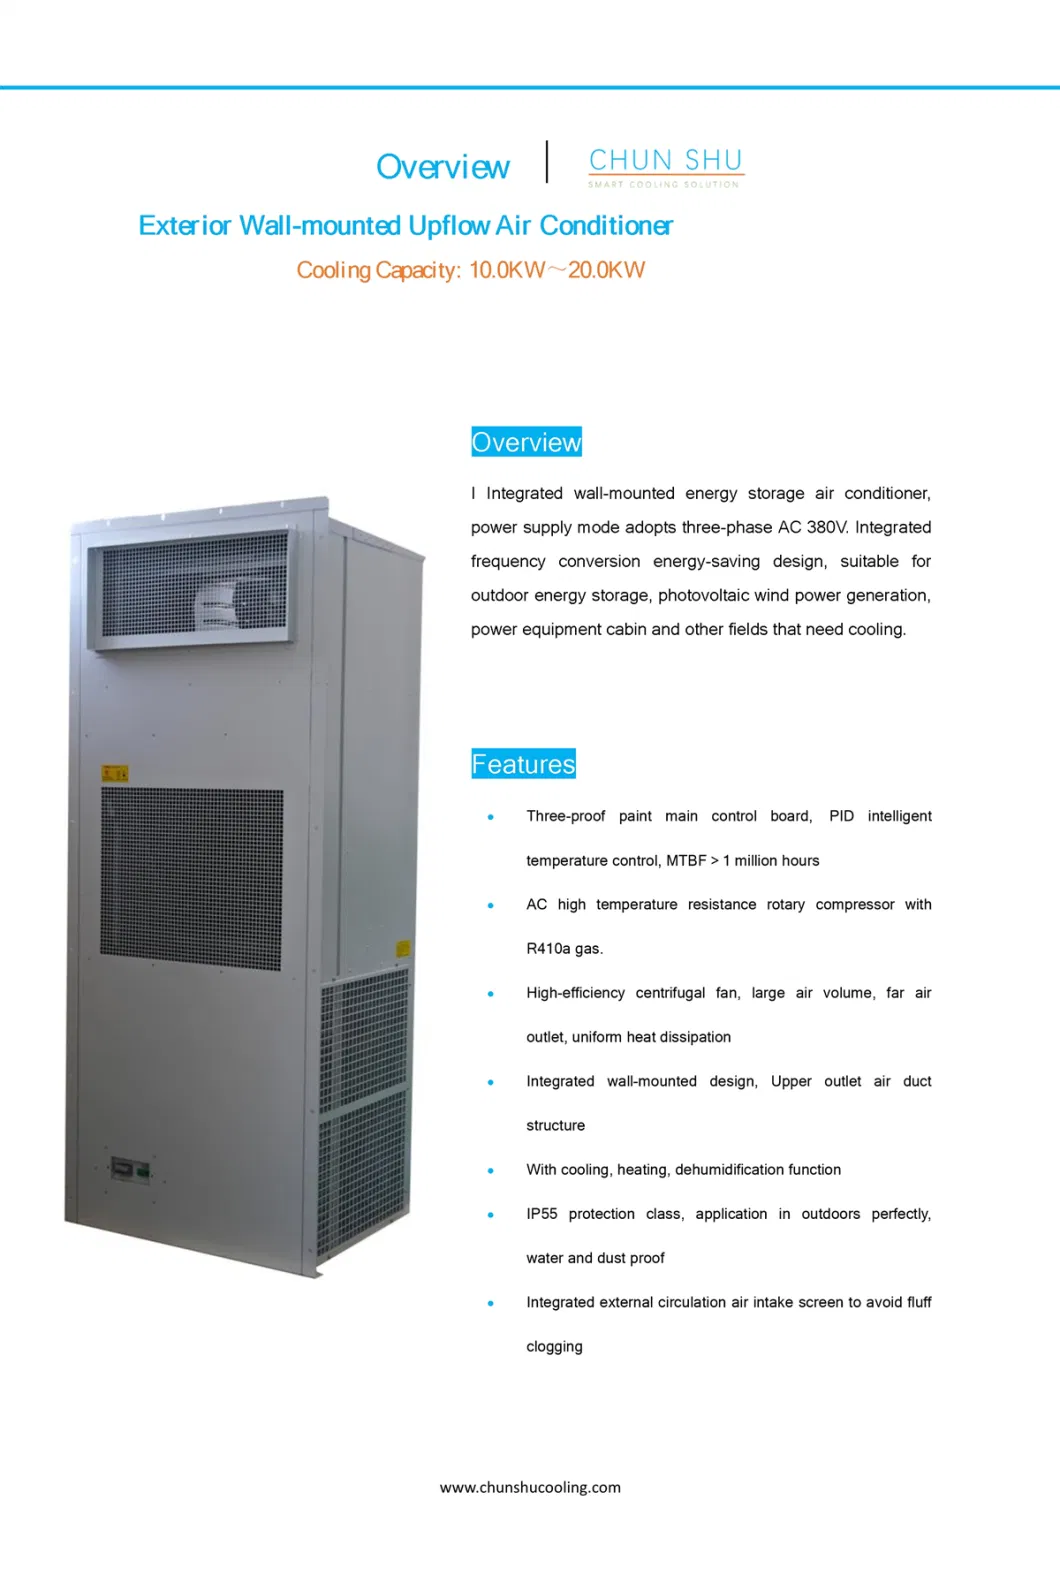 Intelligent Wall-Mounted Upflow Air Conditioner for It Room, Telecom, Shelter